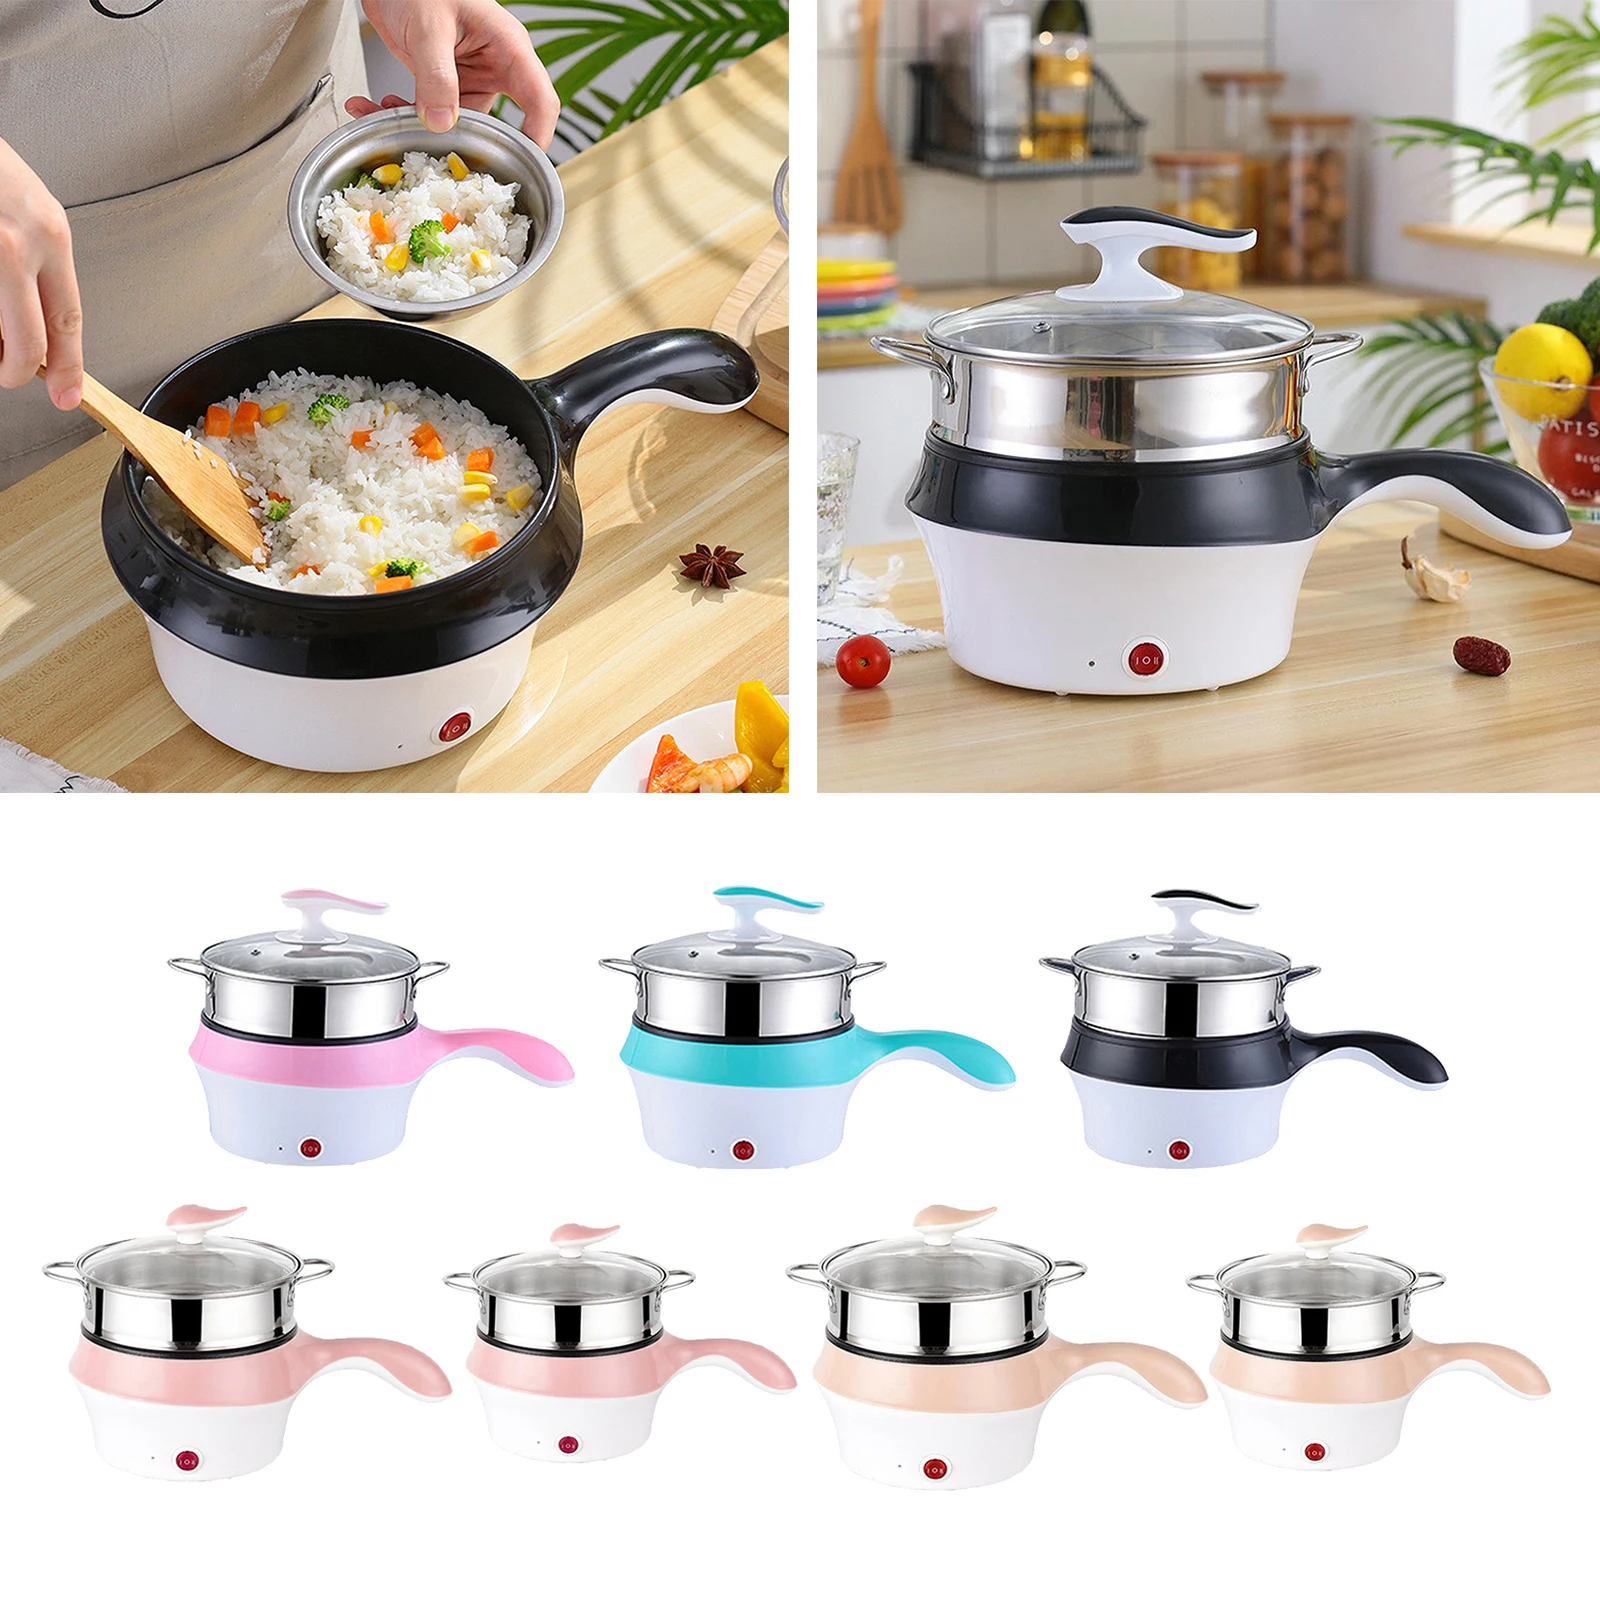 1.8L Electric Cooking Hot Pot Cooker Porridge Stainless Steel Steamed Rack 